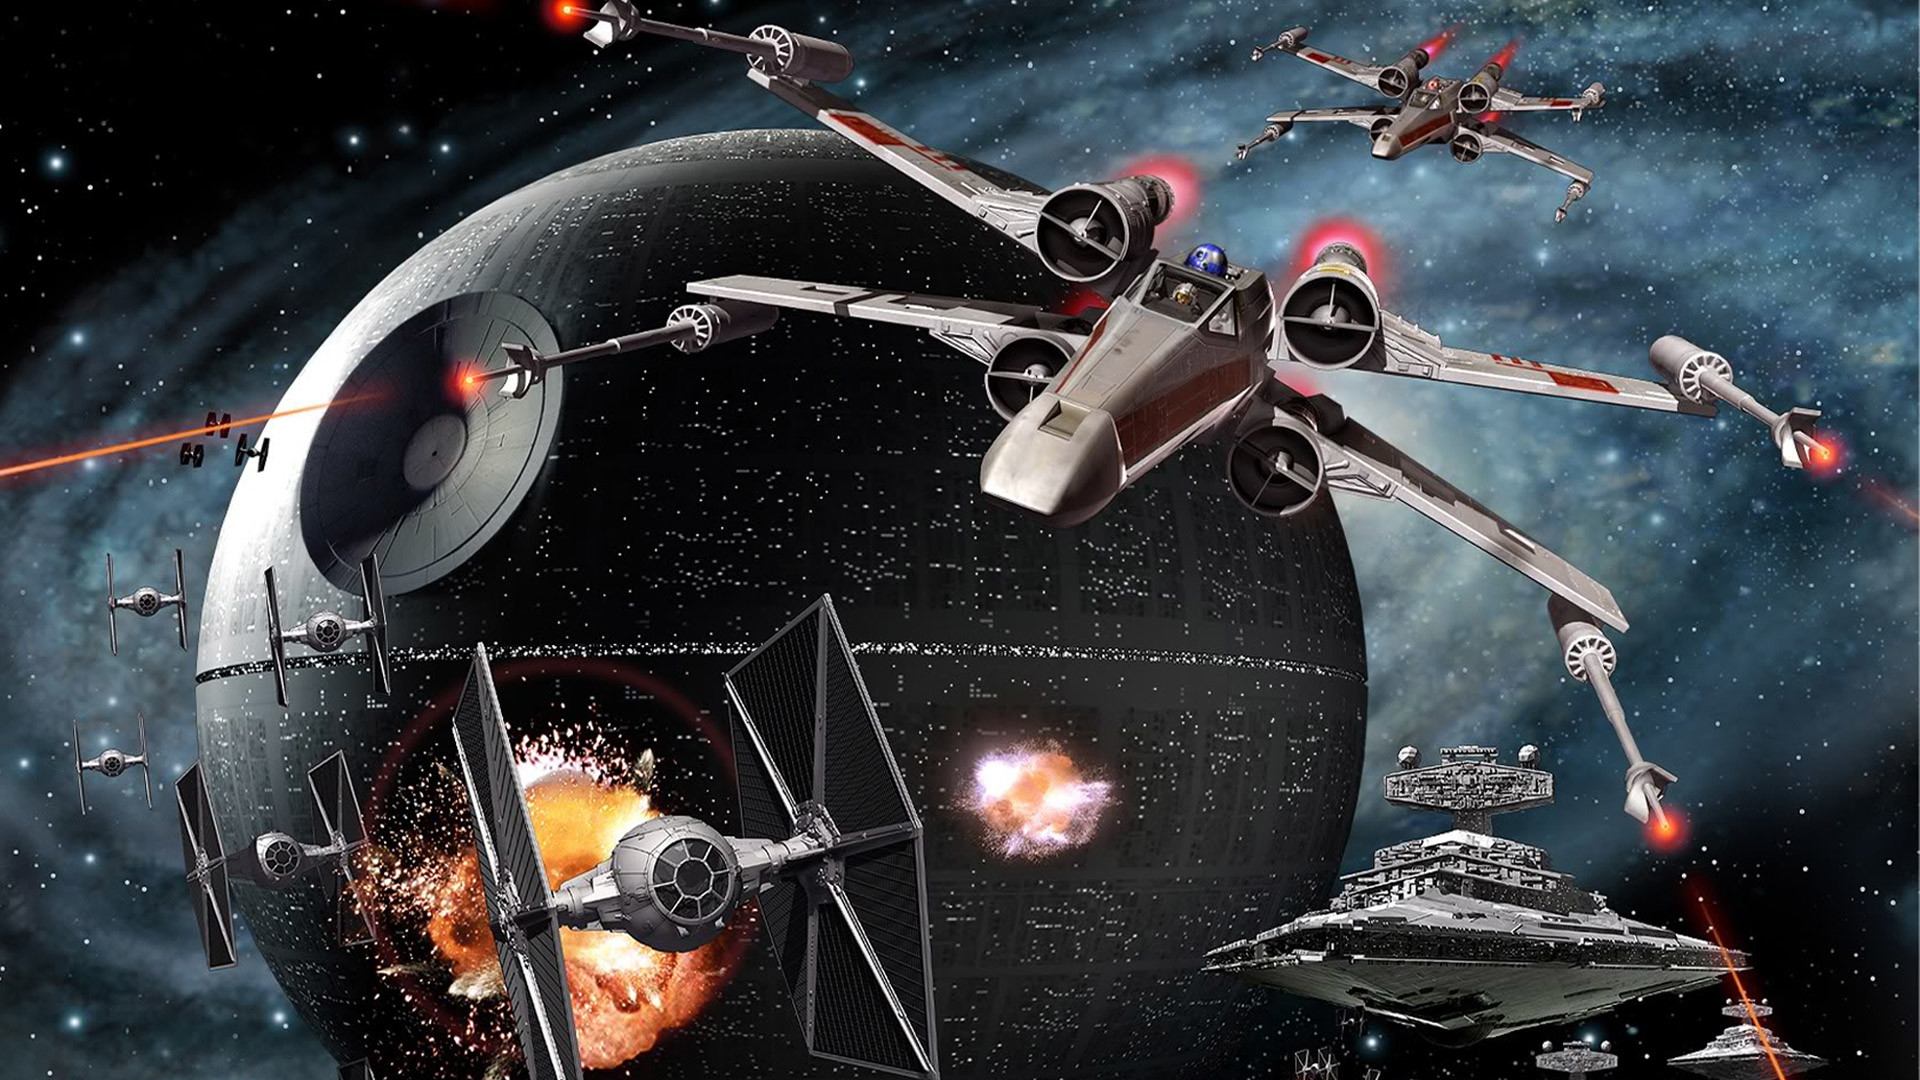 1920x1080 a nice piece of CG artwork showing the battle between the rebel alliance  and the empire over the death star. Looks very detailed as your wallpaper.